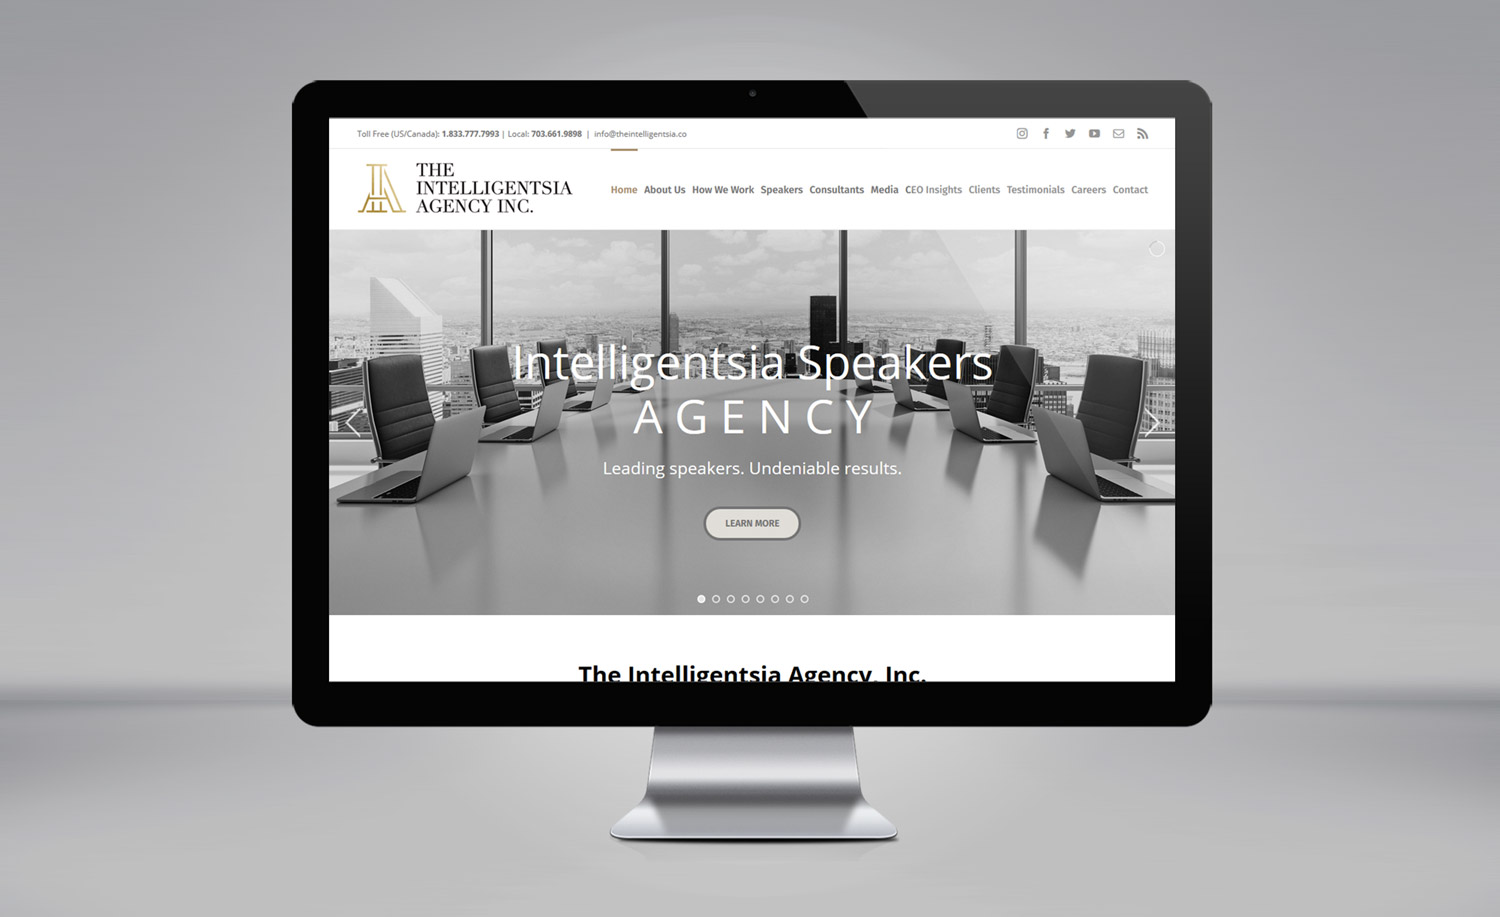 The Intelligentsia Agency, Inc. Speakers and Consultants Agency